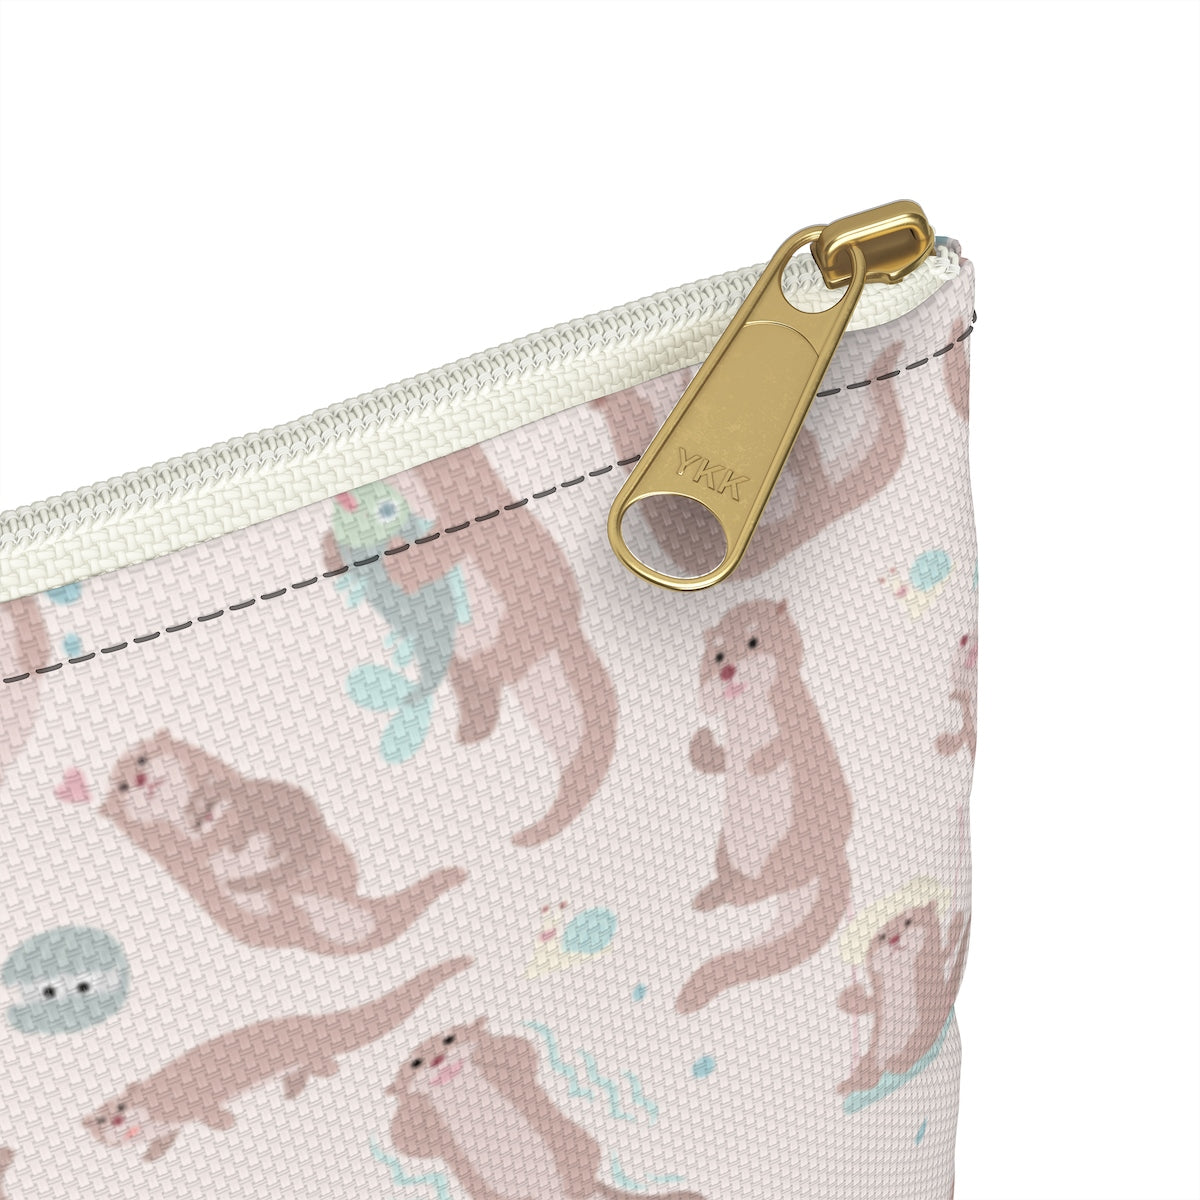 Sea Otter Zip Pouch Bag, Pink Pastel Pencil Makeup Travel Cosmetic Cute Gifts Zippered Coin Purse Accessories Otter Lovers Accessory Starcove Fashion